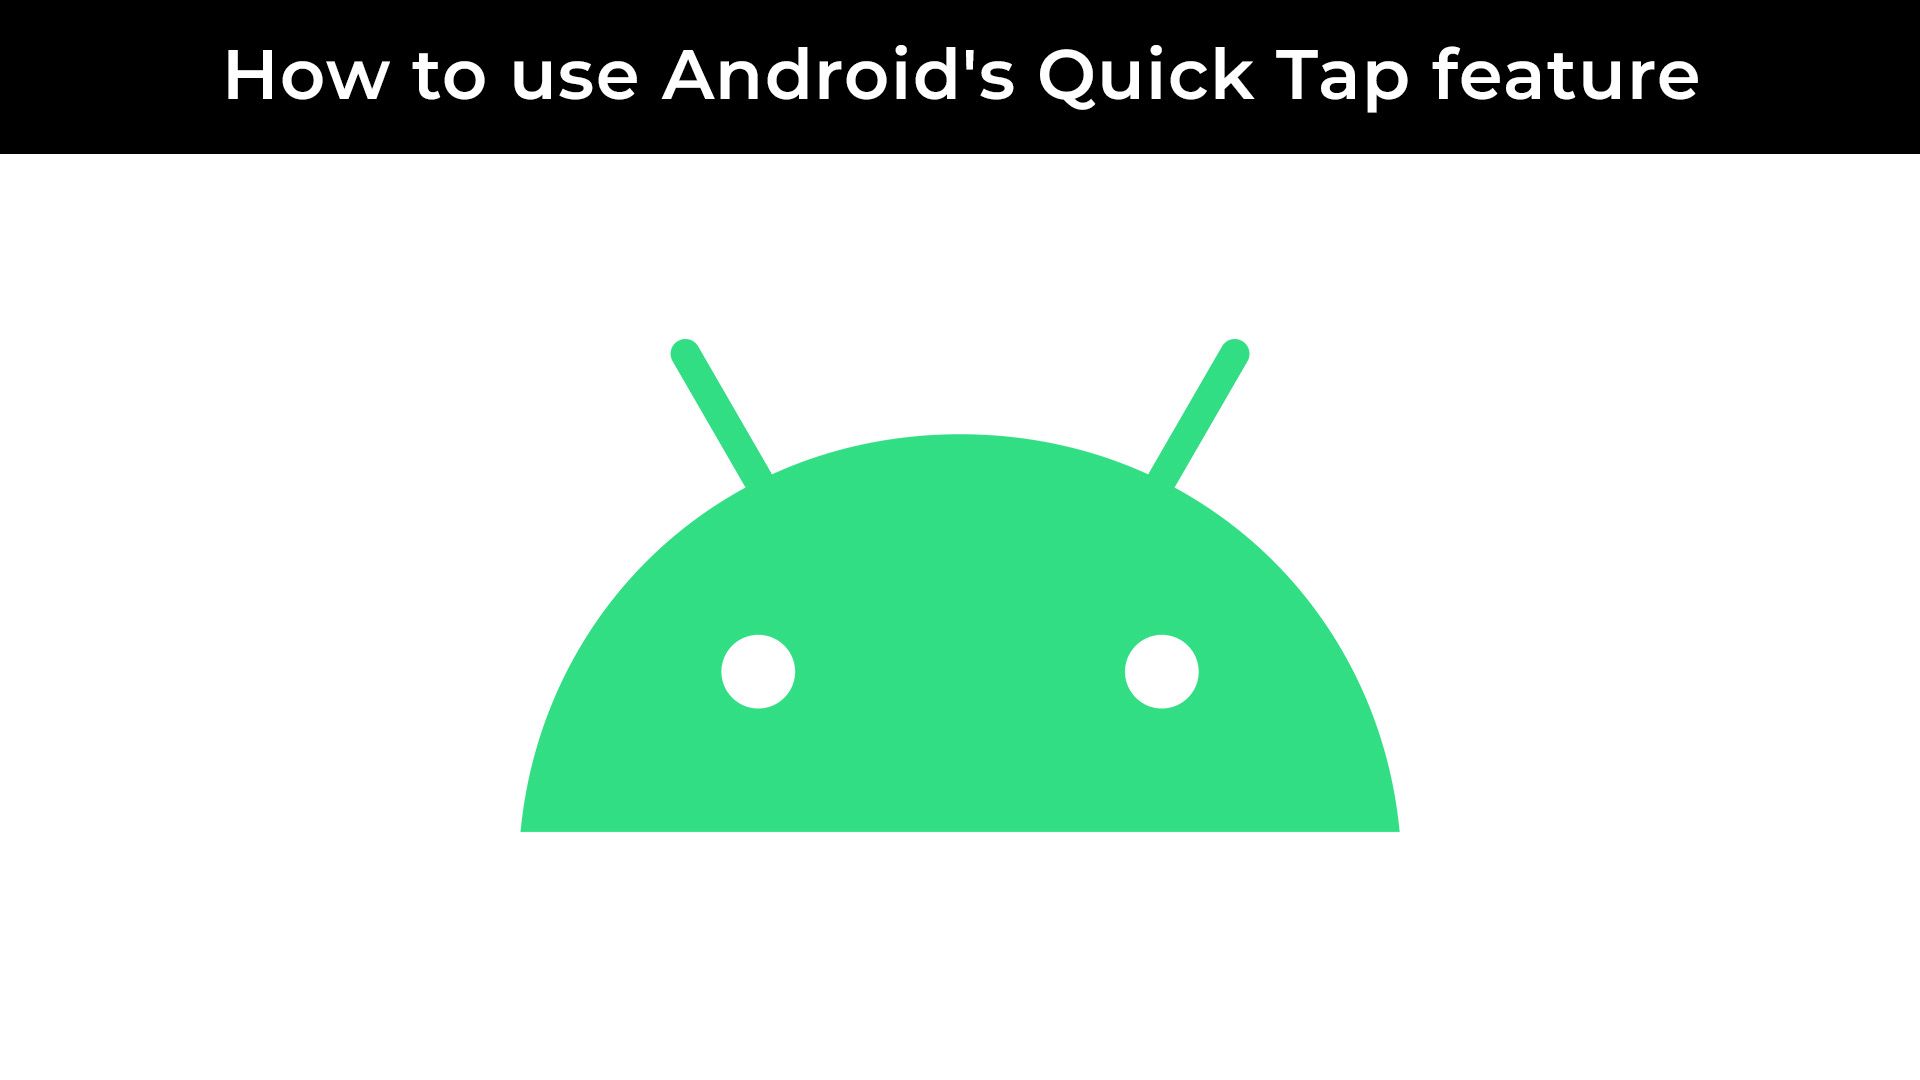 How to use Android's Quick Tap feature video thumbnail